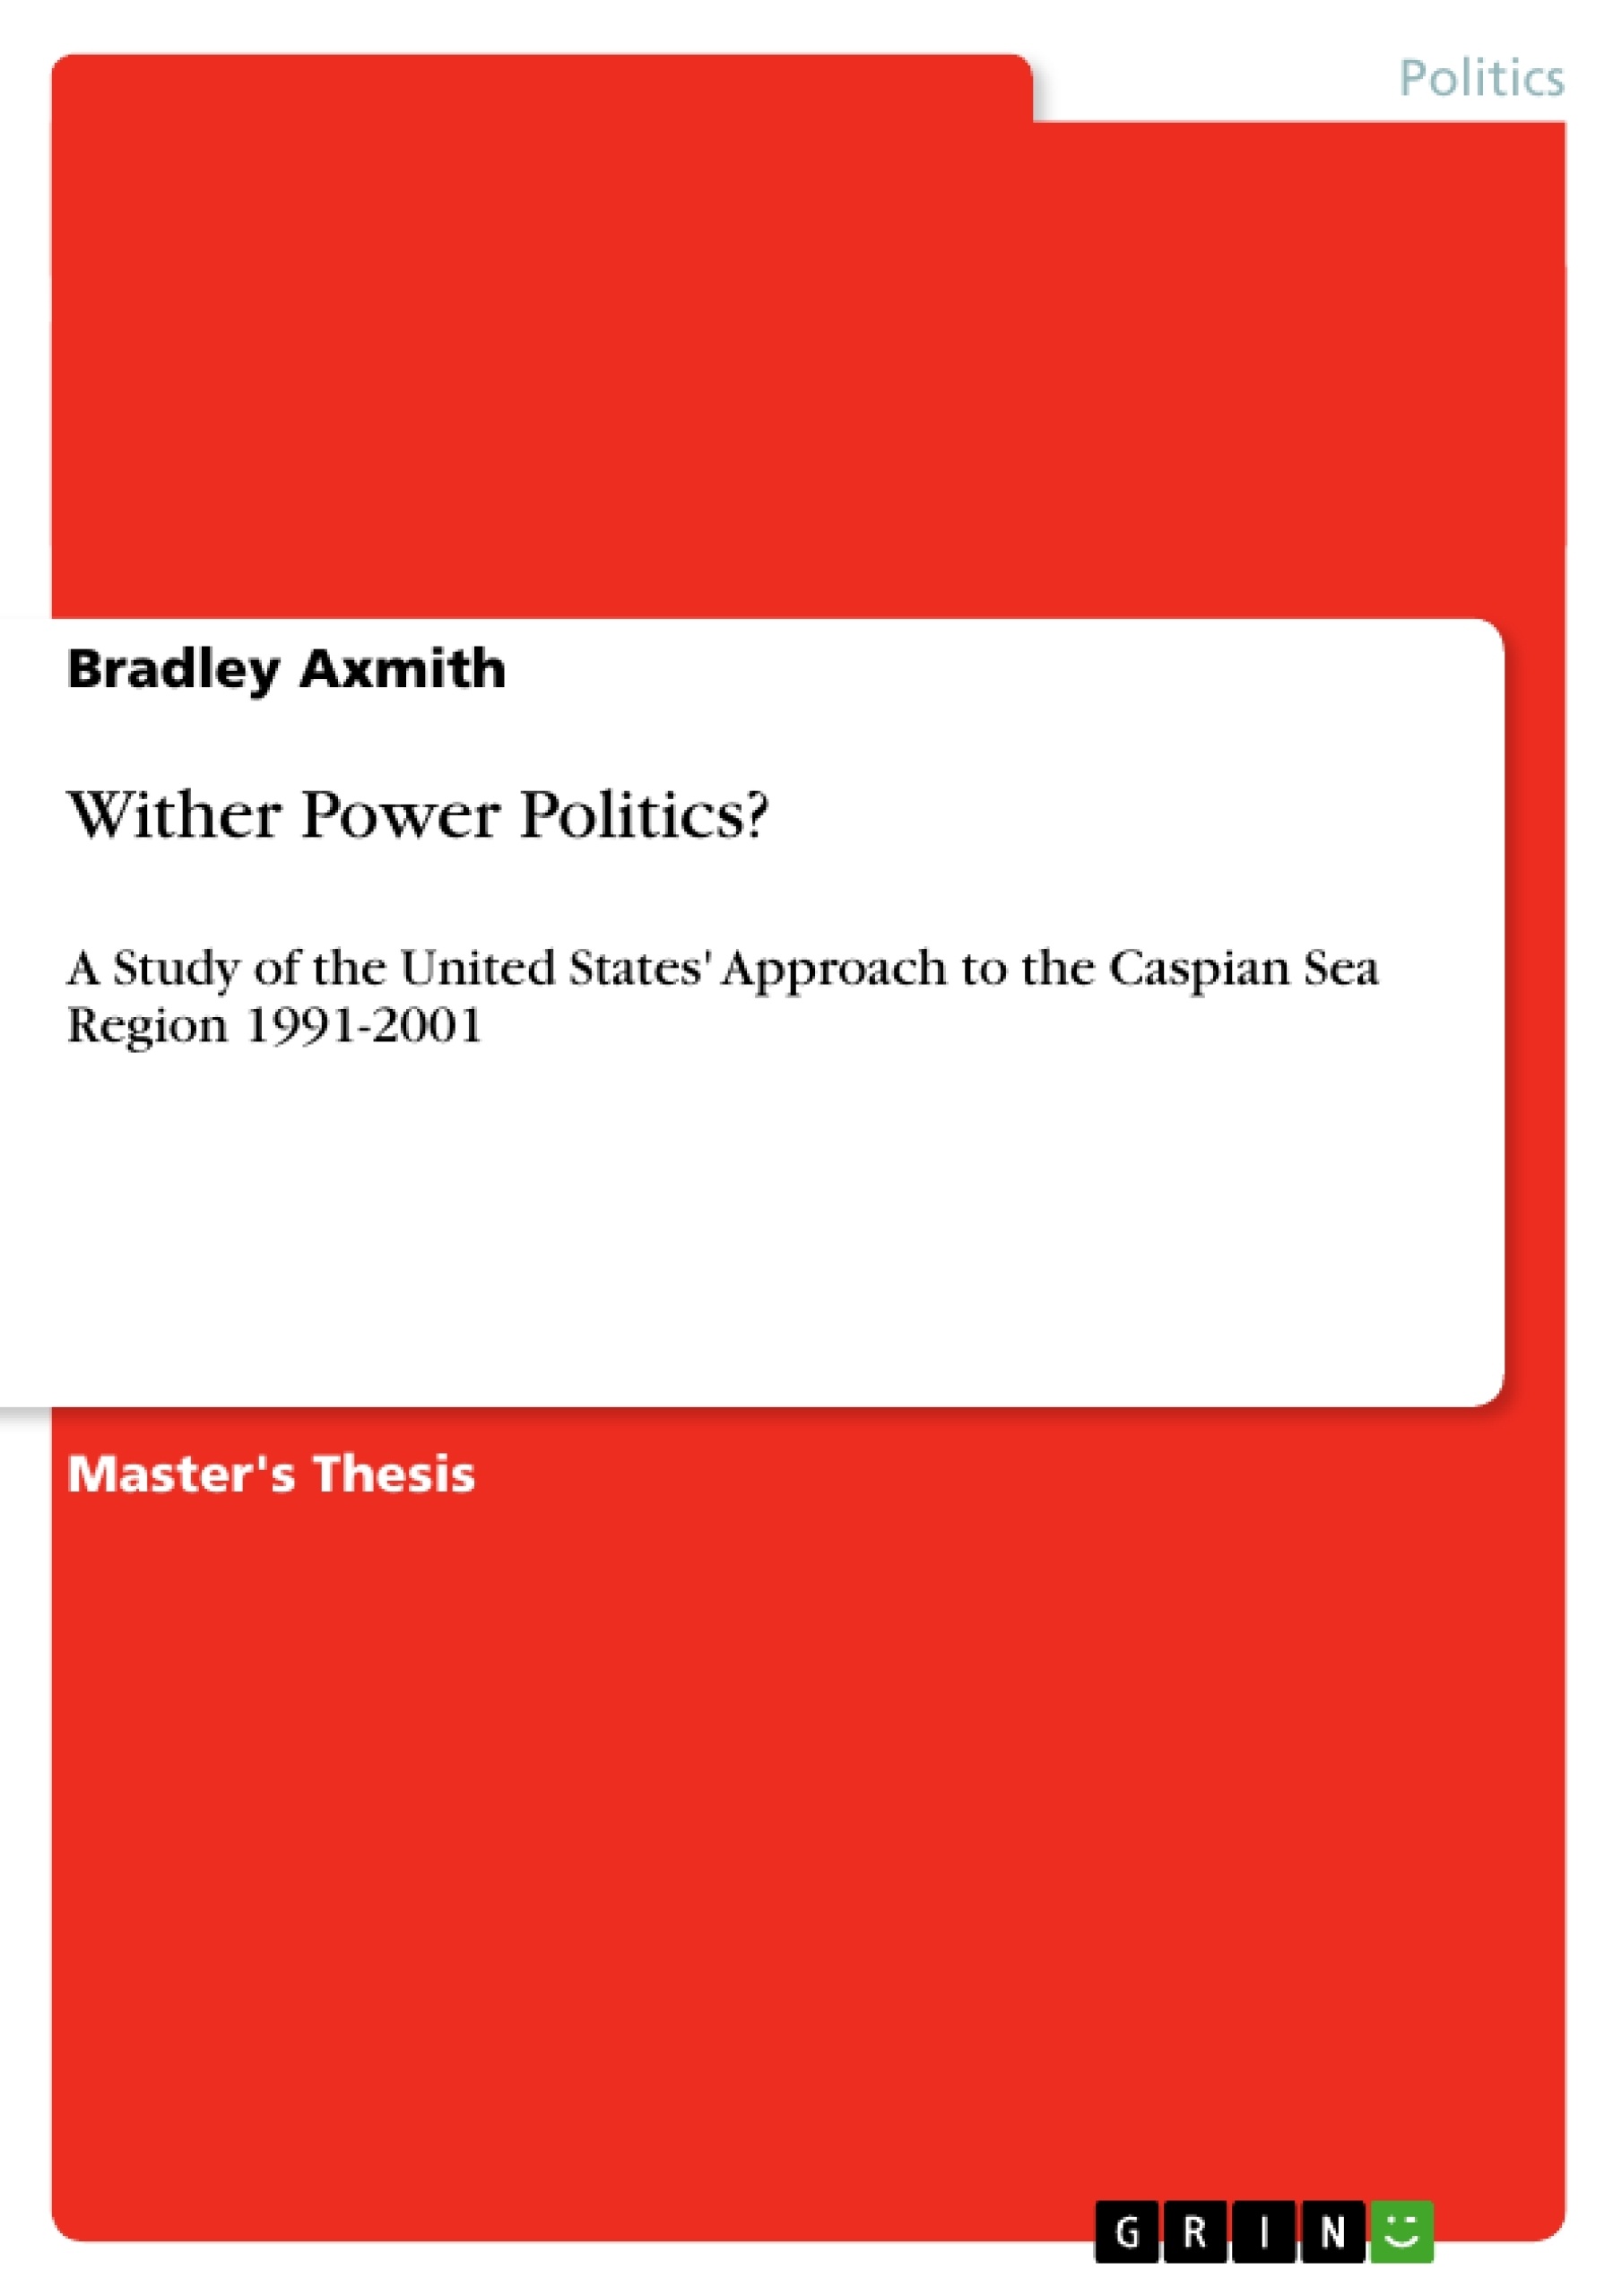 Title: Wither Power Politics?